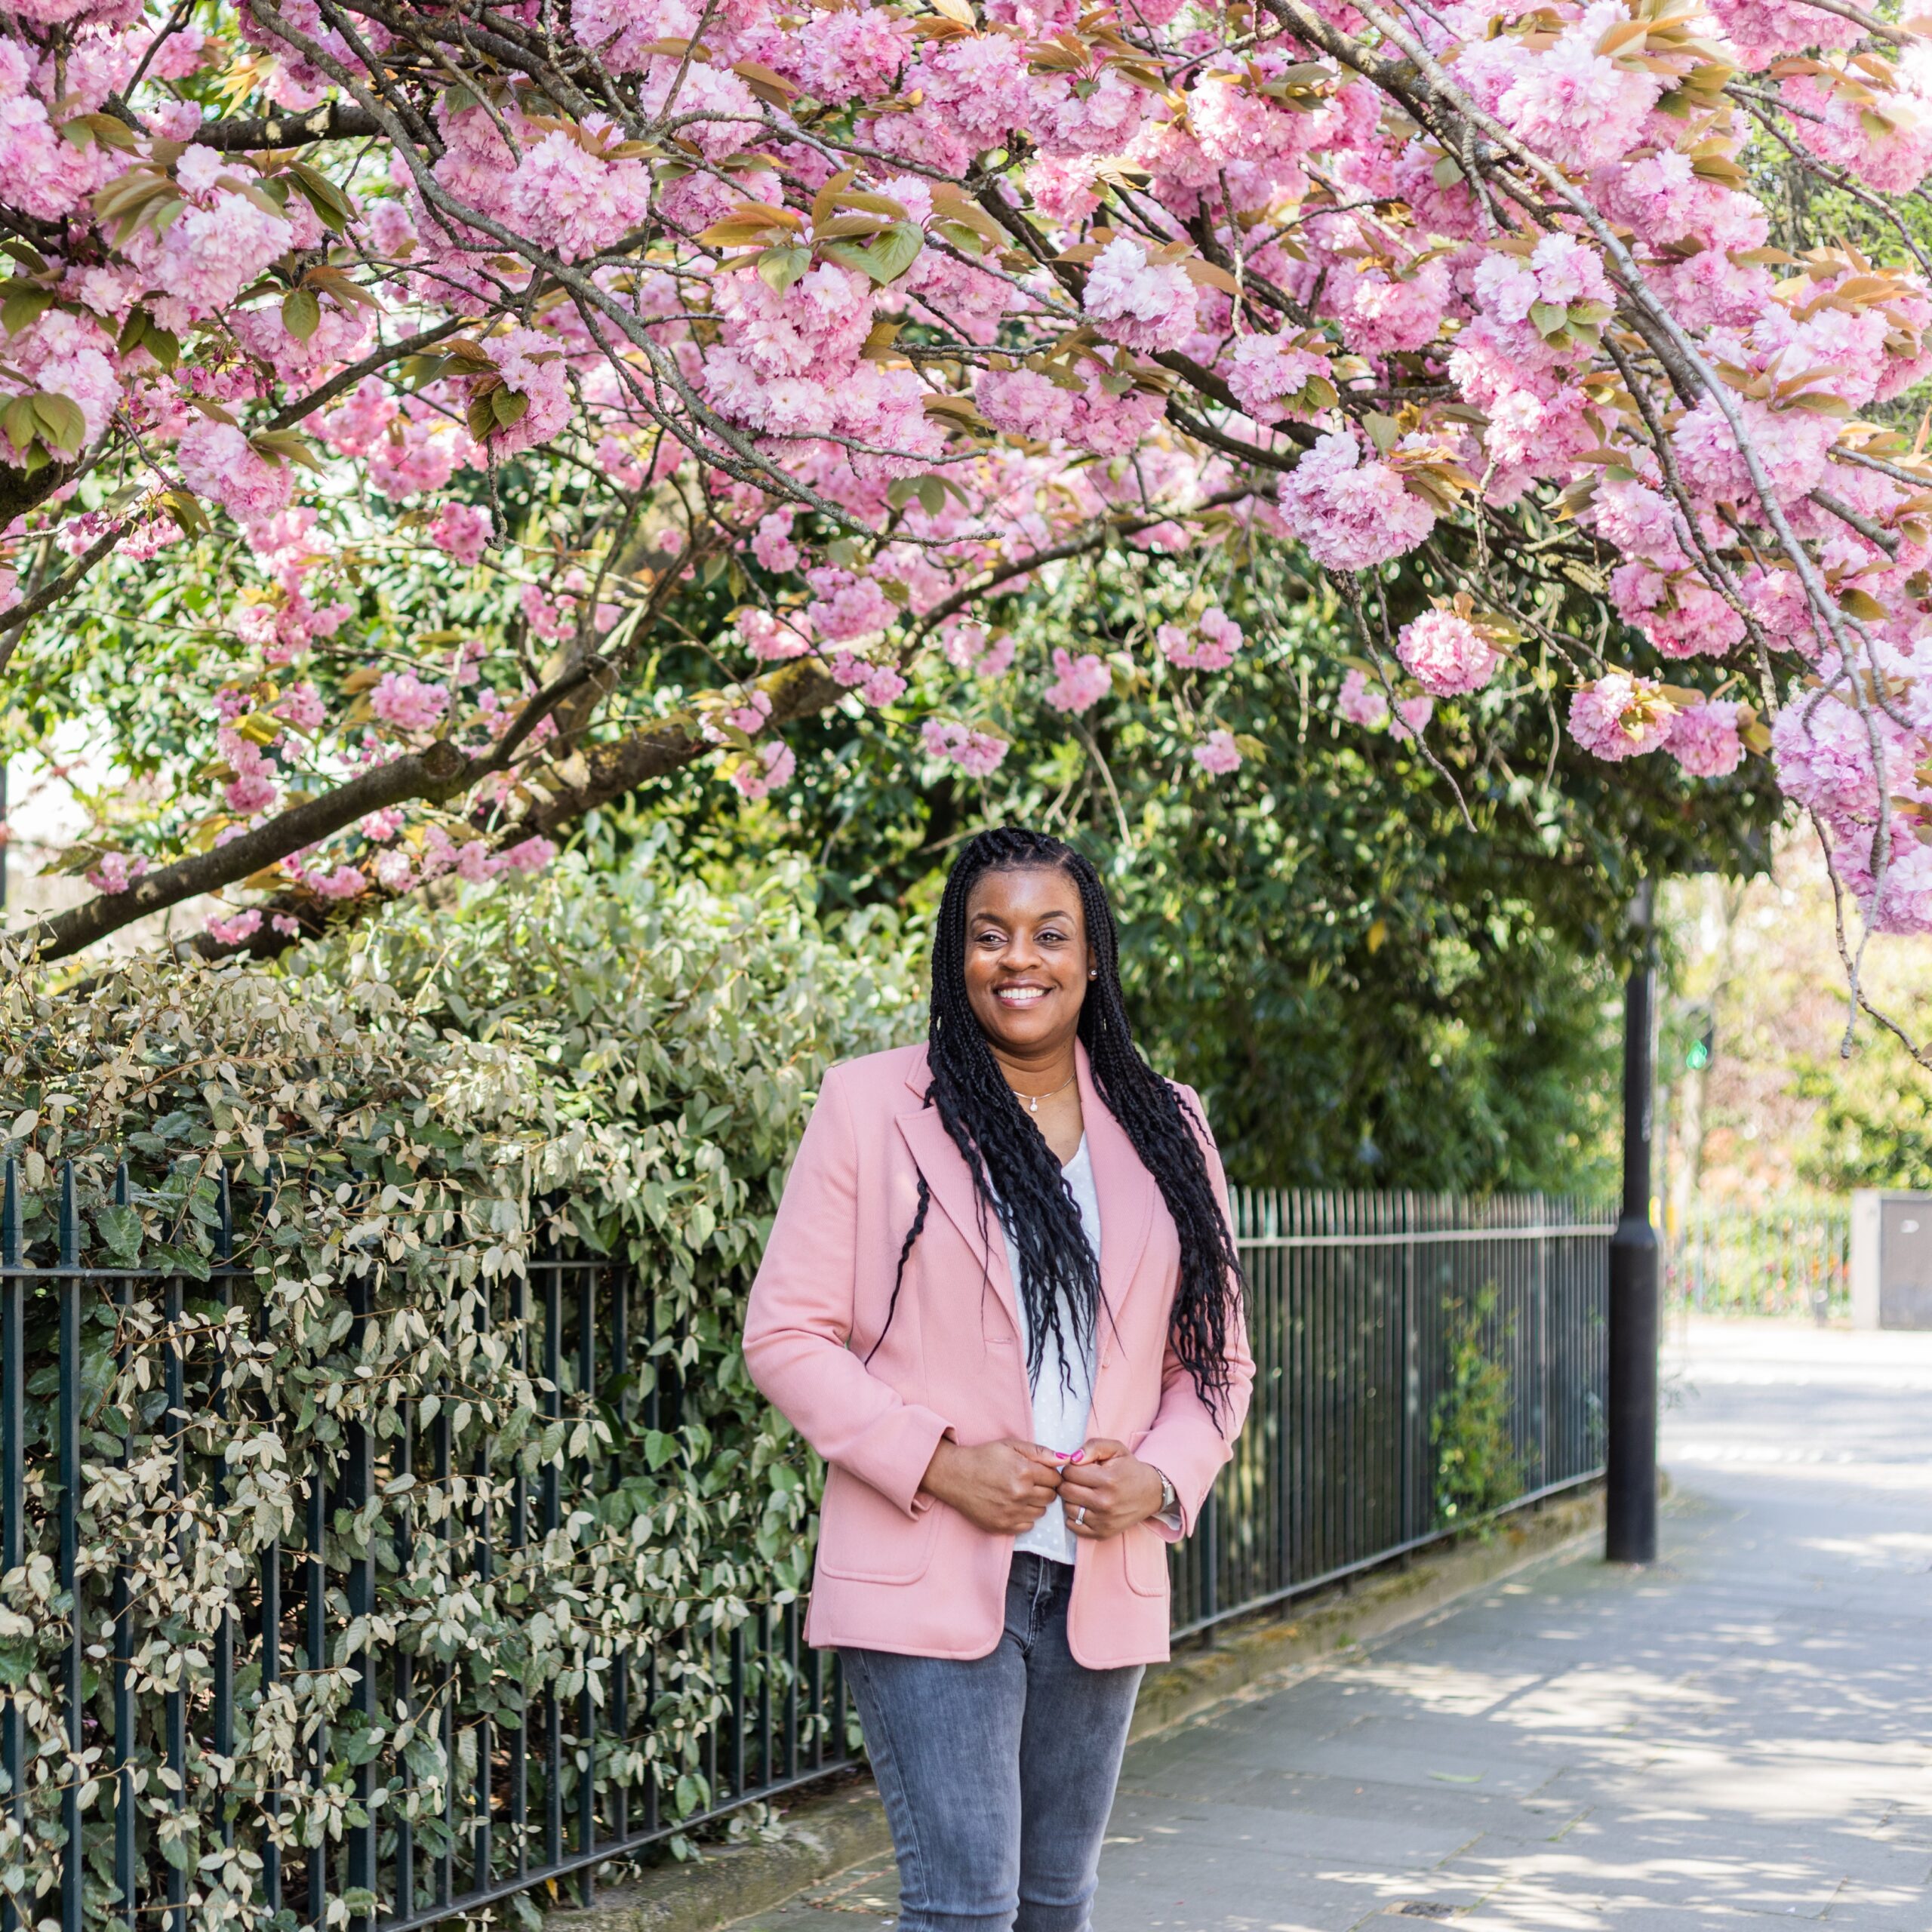 Wedding planner Natasha is stood underneath a blossom tree in London. She is a black lady wearing jeans and a pink blazer. Mini shoot image by London brand photographer AKP Branding Stories